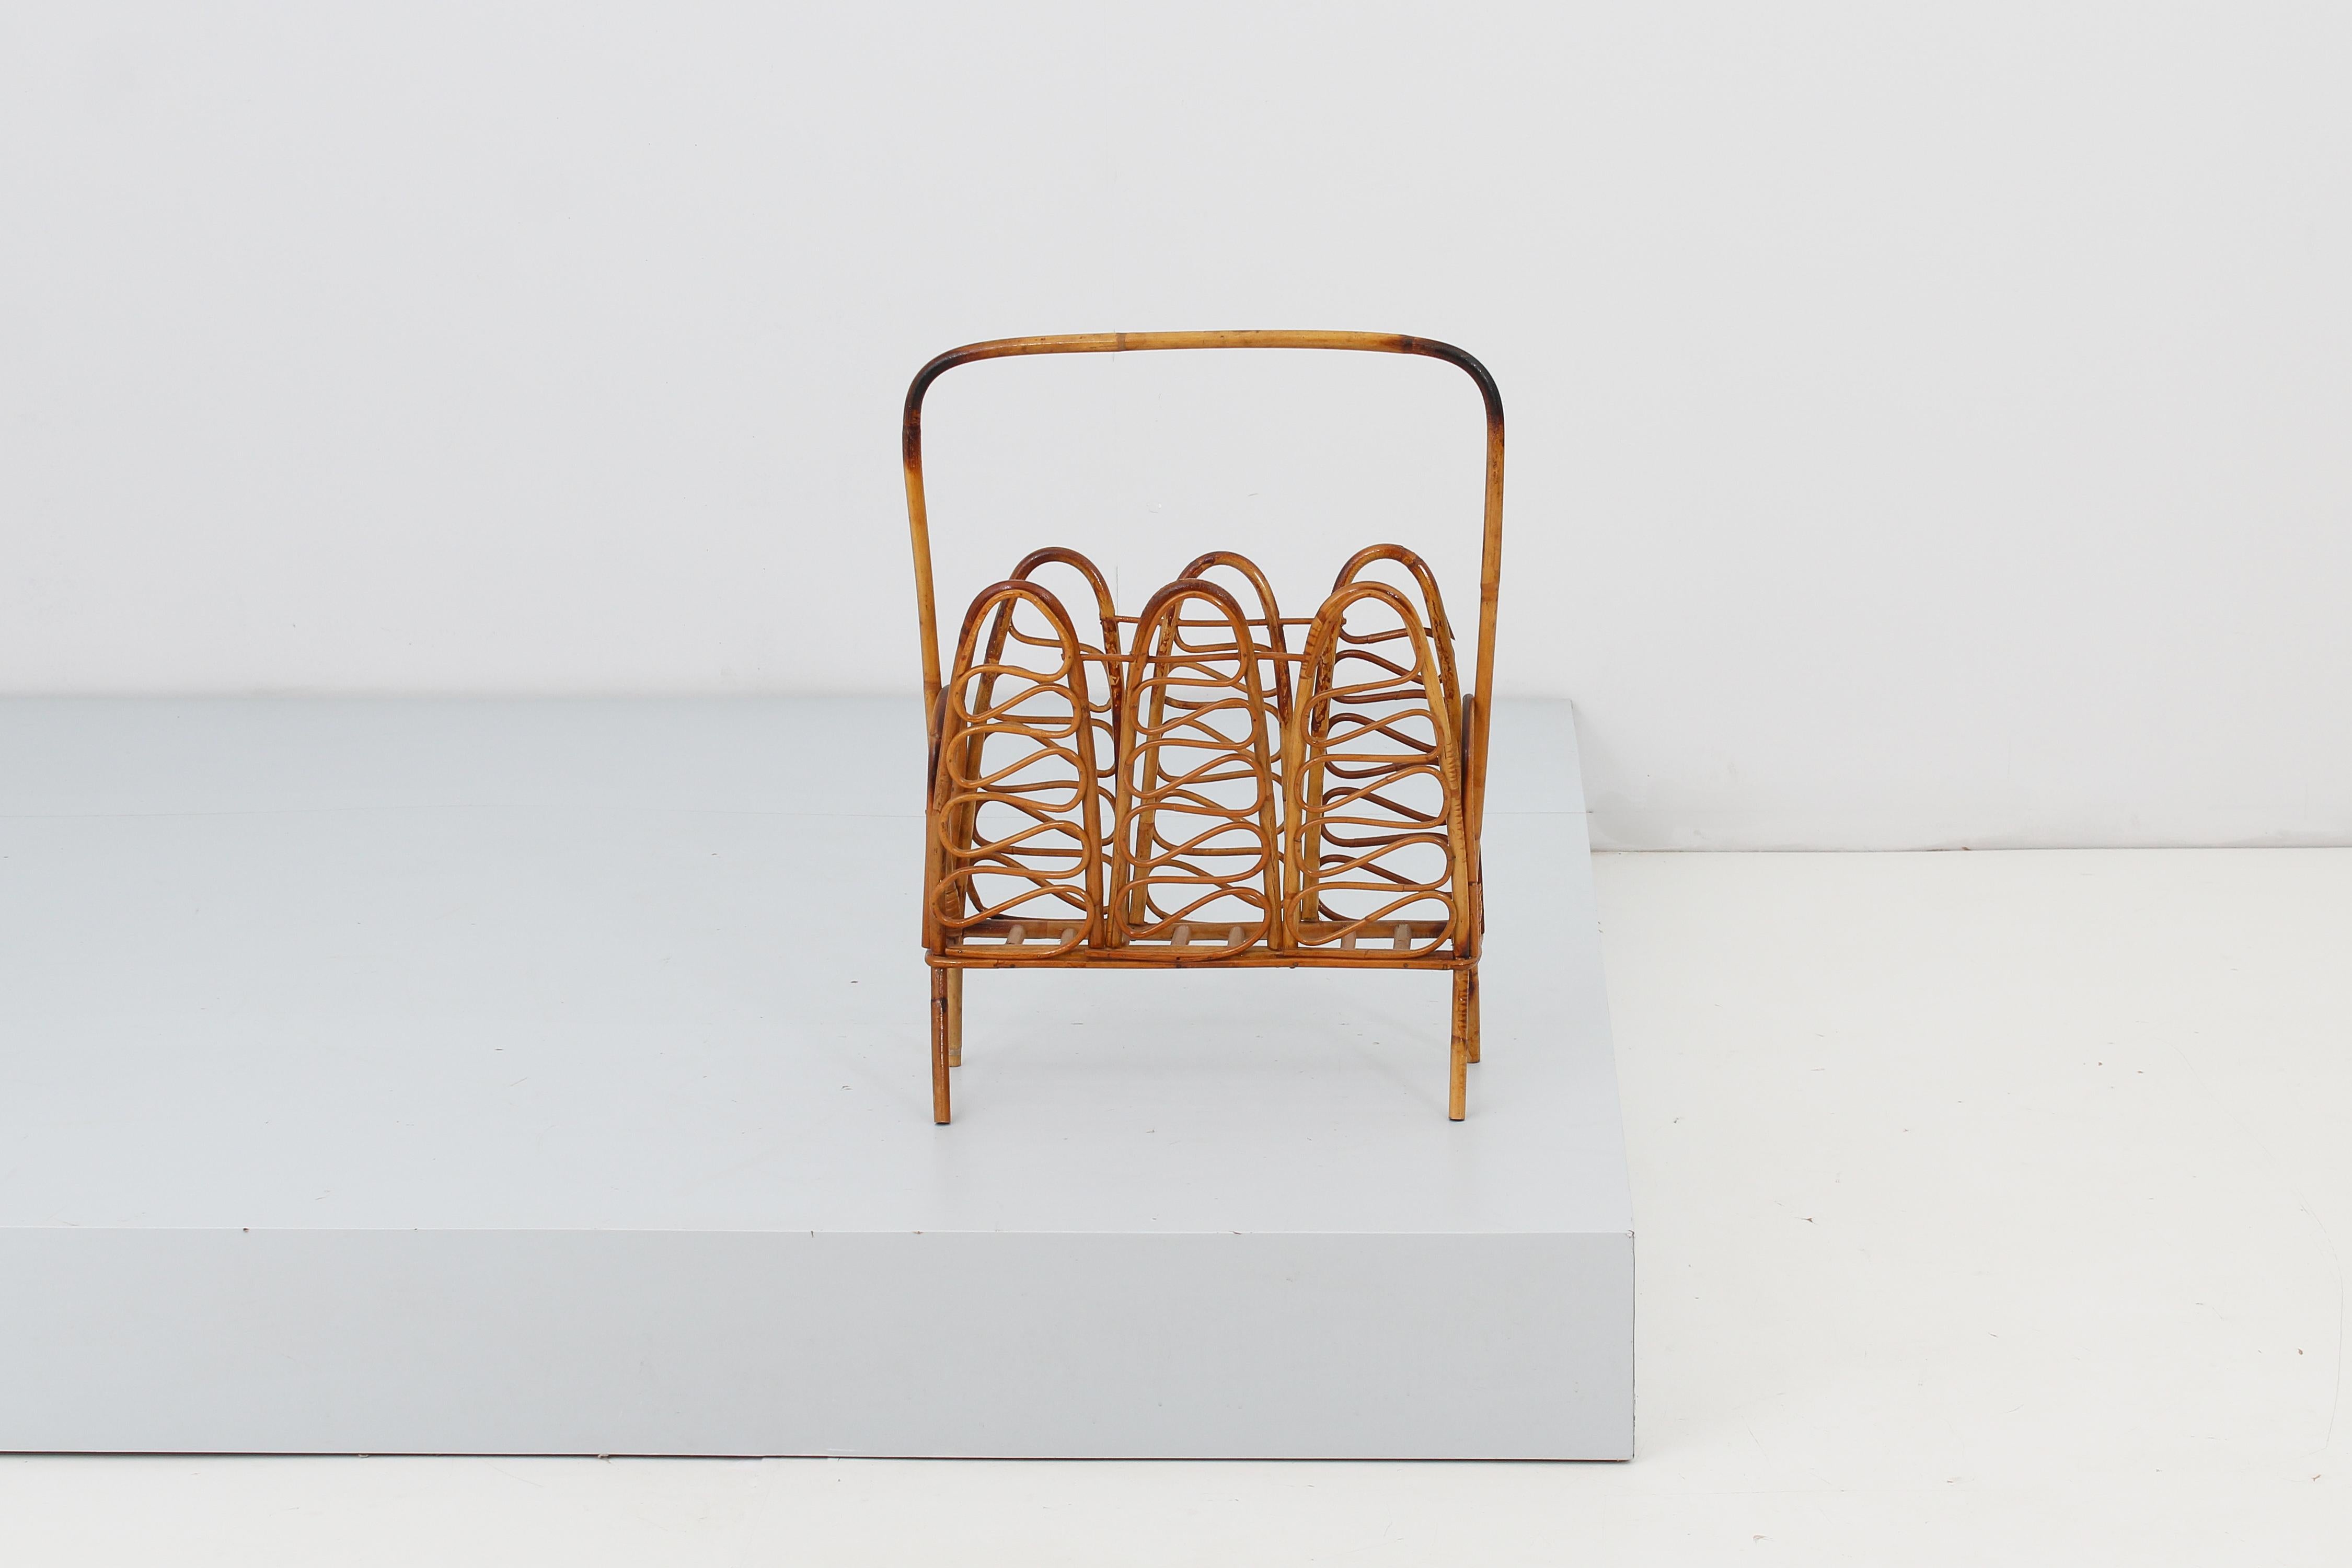 Stylish magazine rack in straight and curved bamboo canes and wicker bands with curved handle. Attributed to Bonacina, Italian manufacture in the 60s.
Wear consistent with age and use.